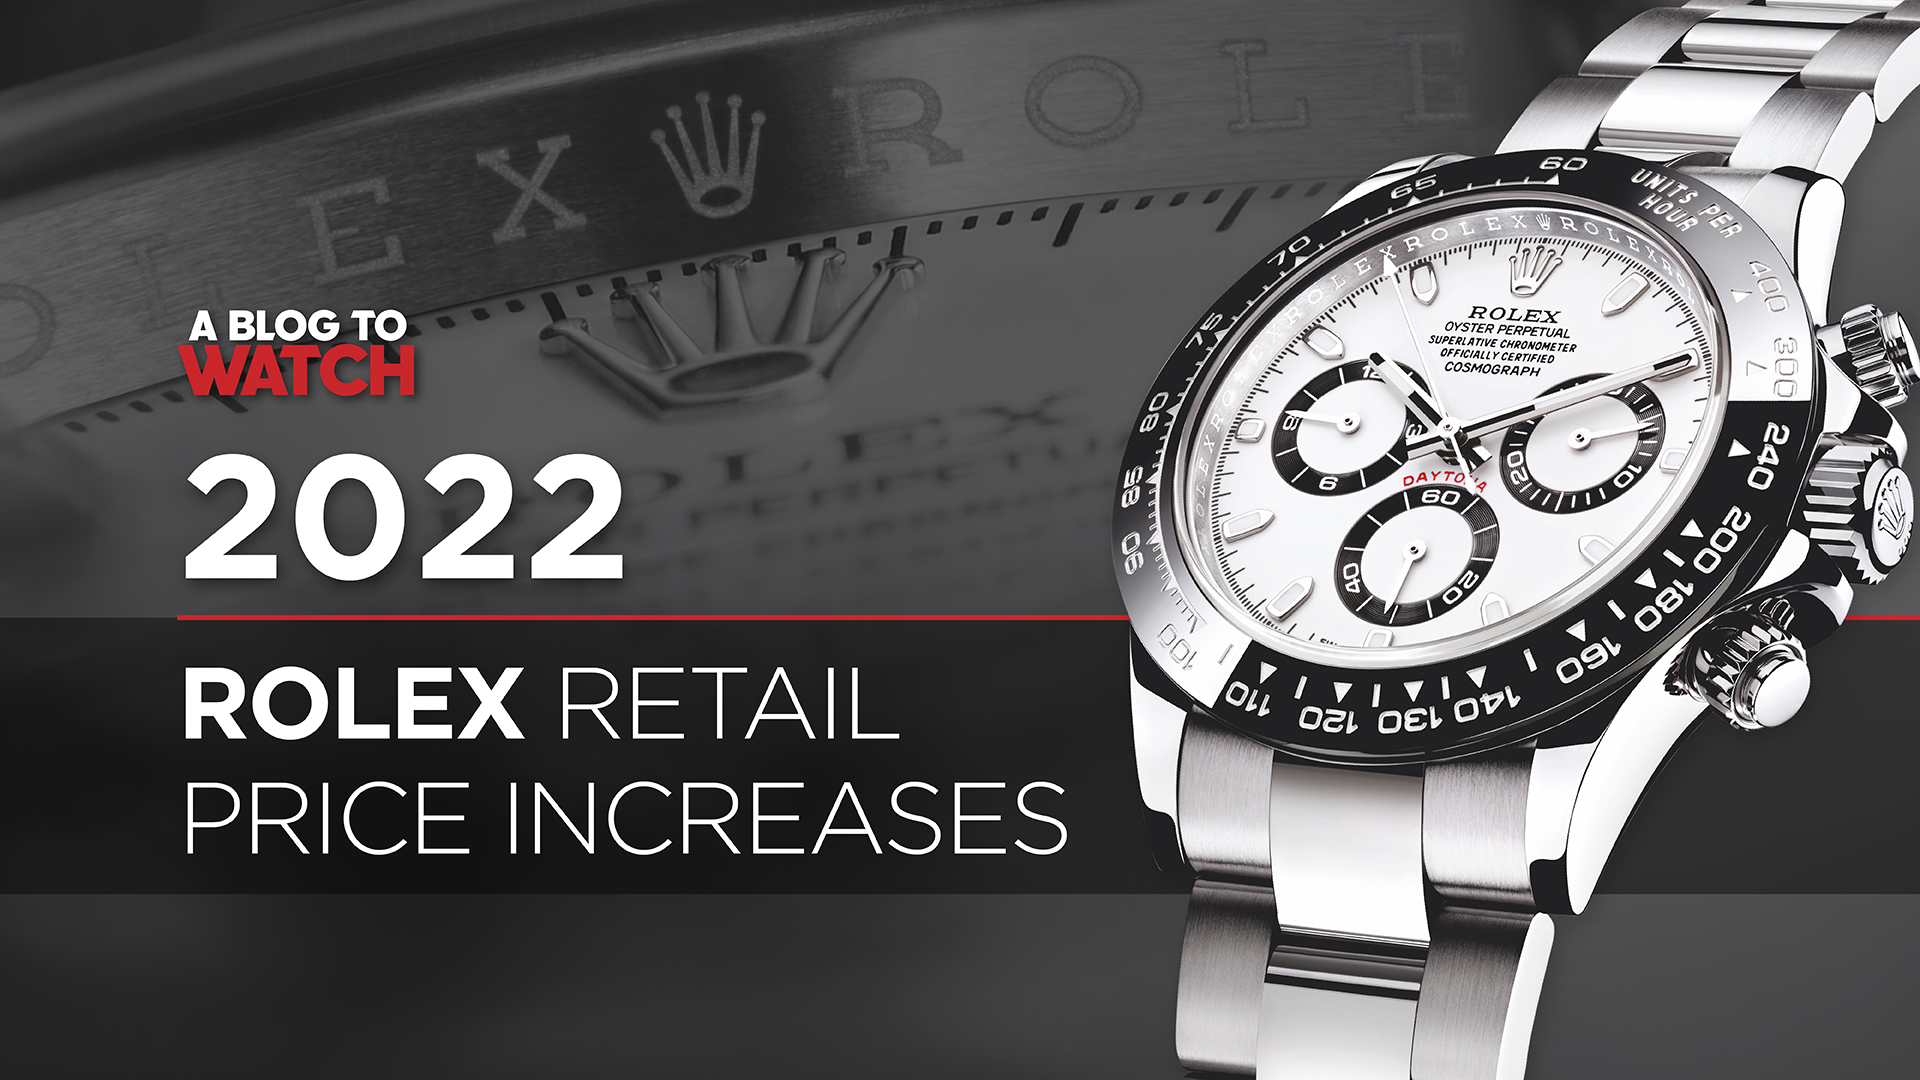 Price of Luxury Items Like Watches and Jewelry Rises